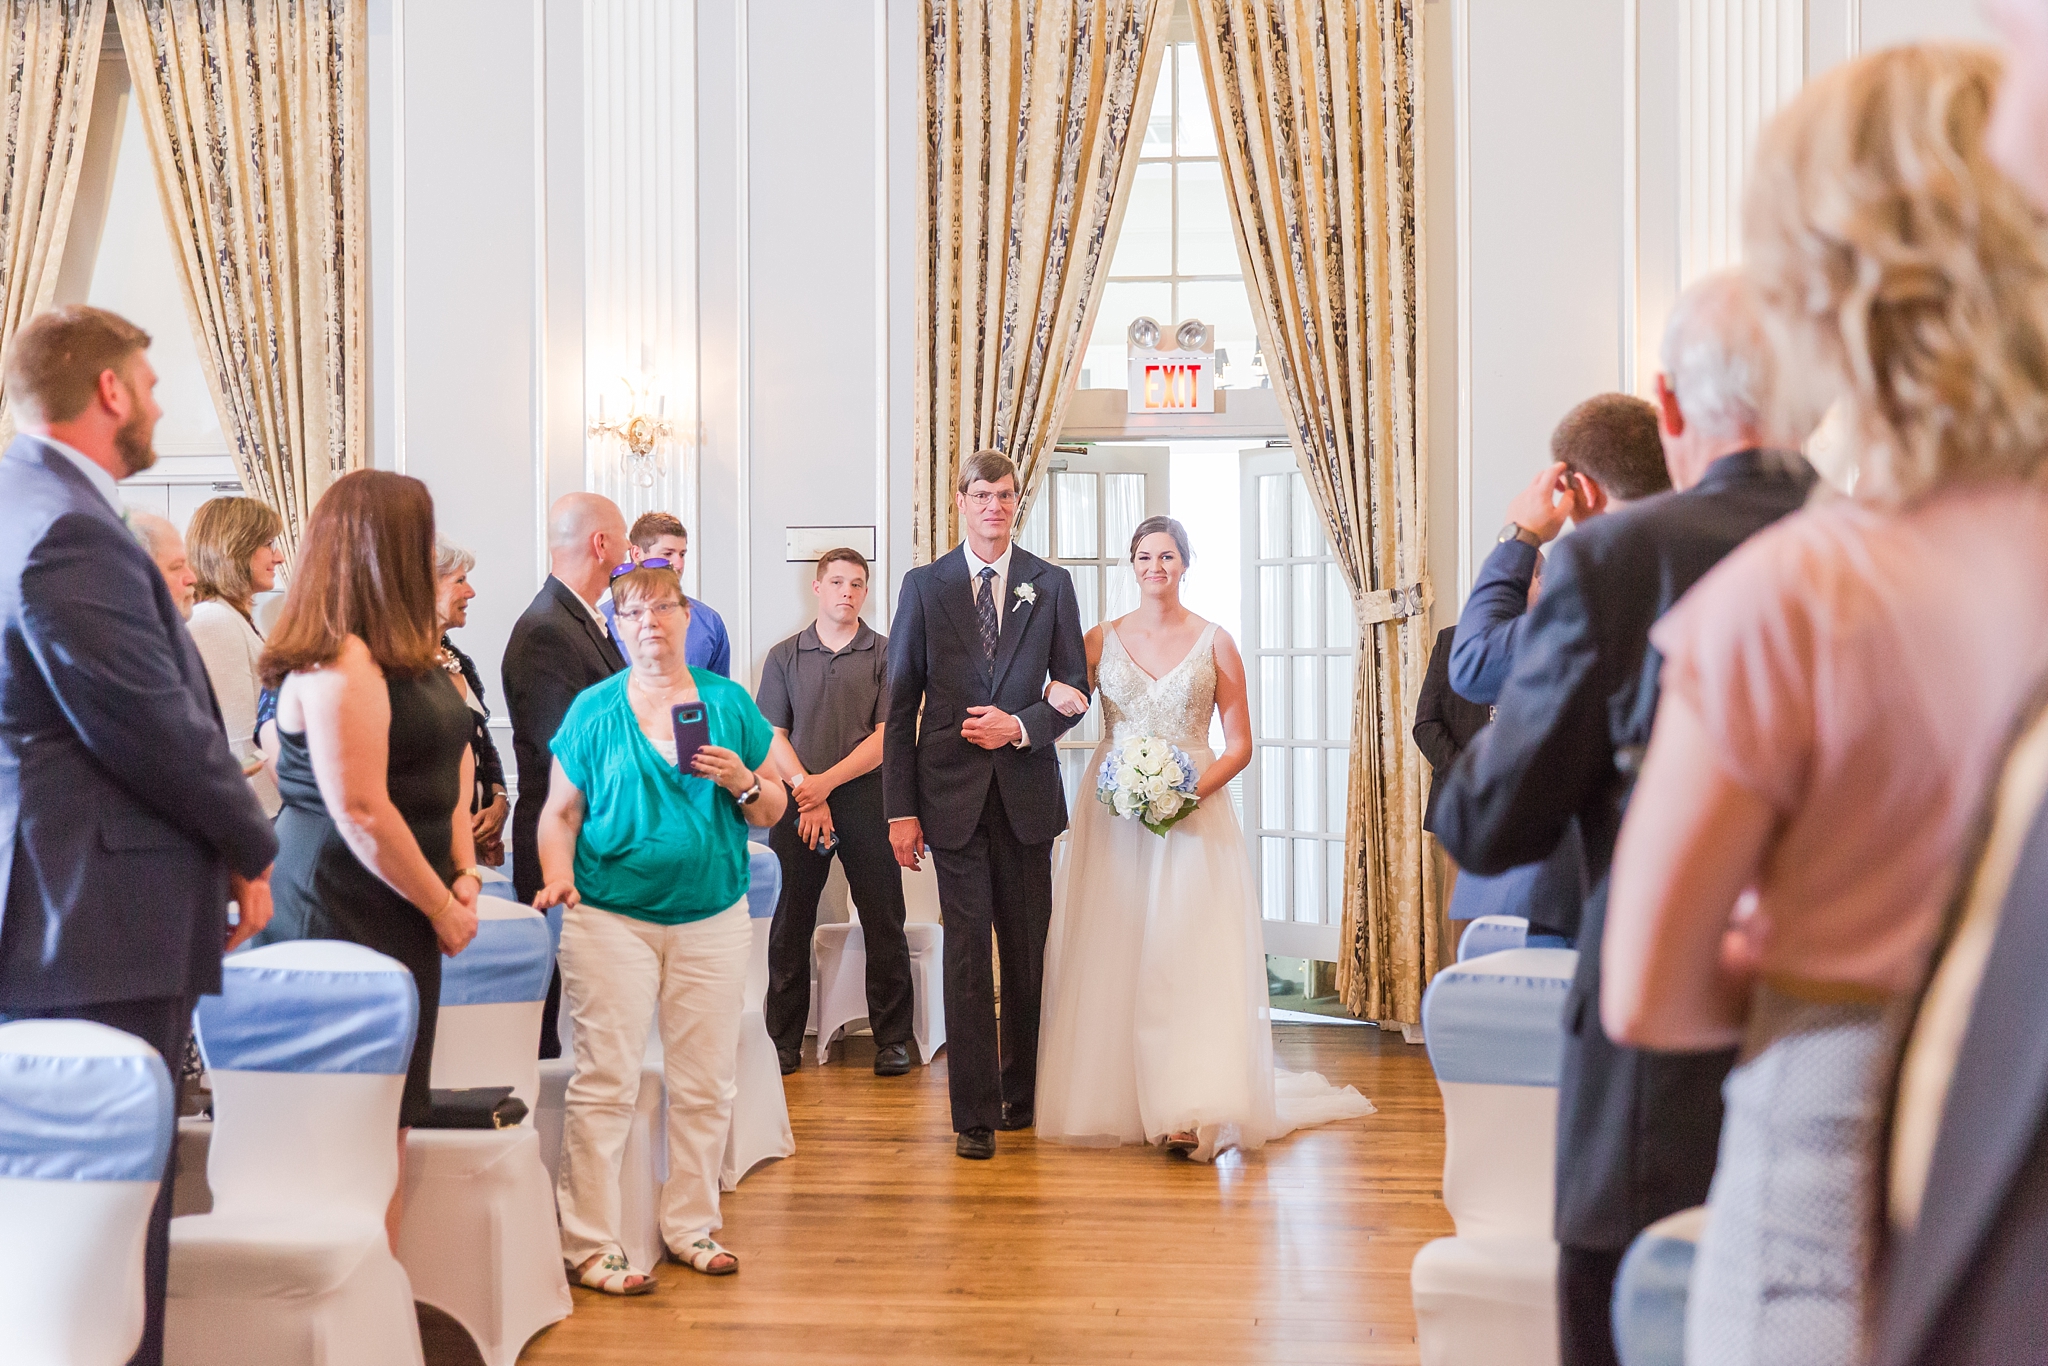 classic-intimate-fun-wedding-photos-at-the-meeting-house-grand-ballroom-in-plymouth-michigan-by-courtney-carolyn-photography_0021.jpg